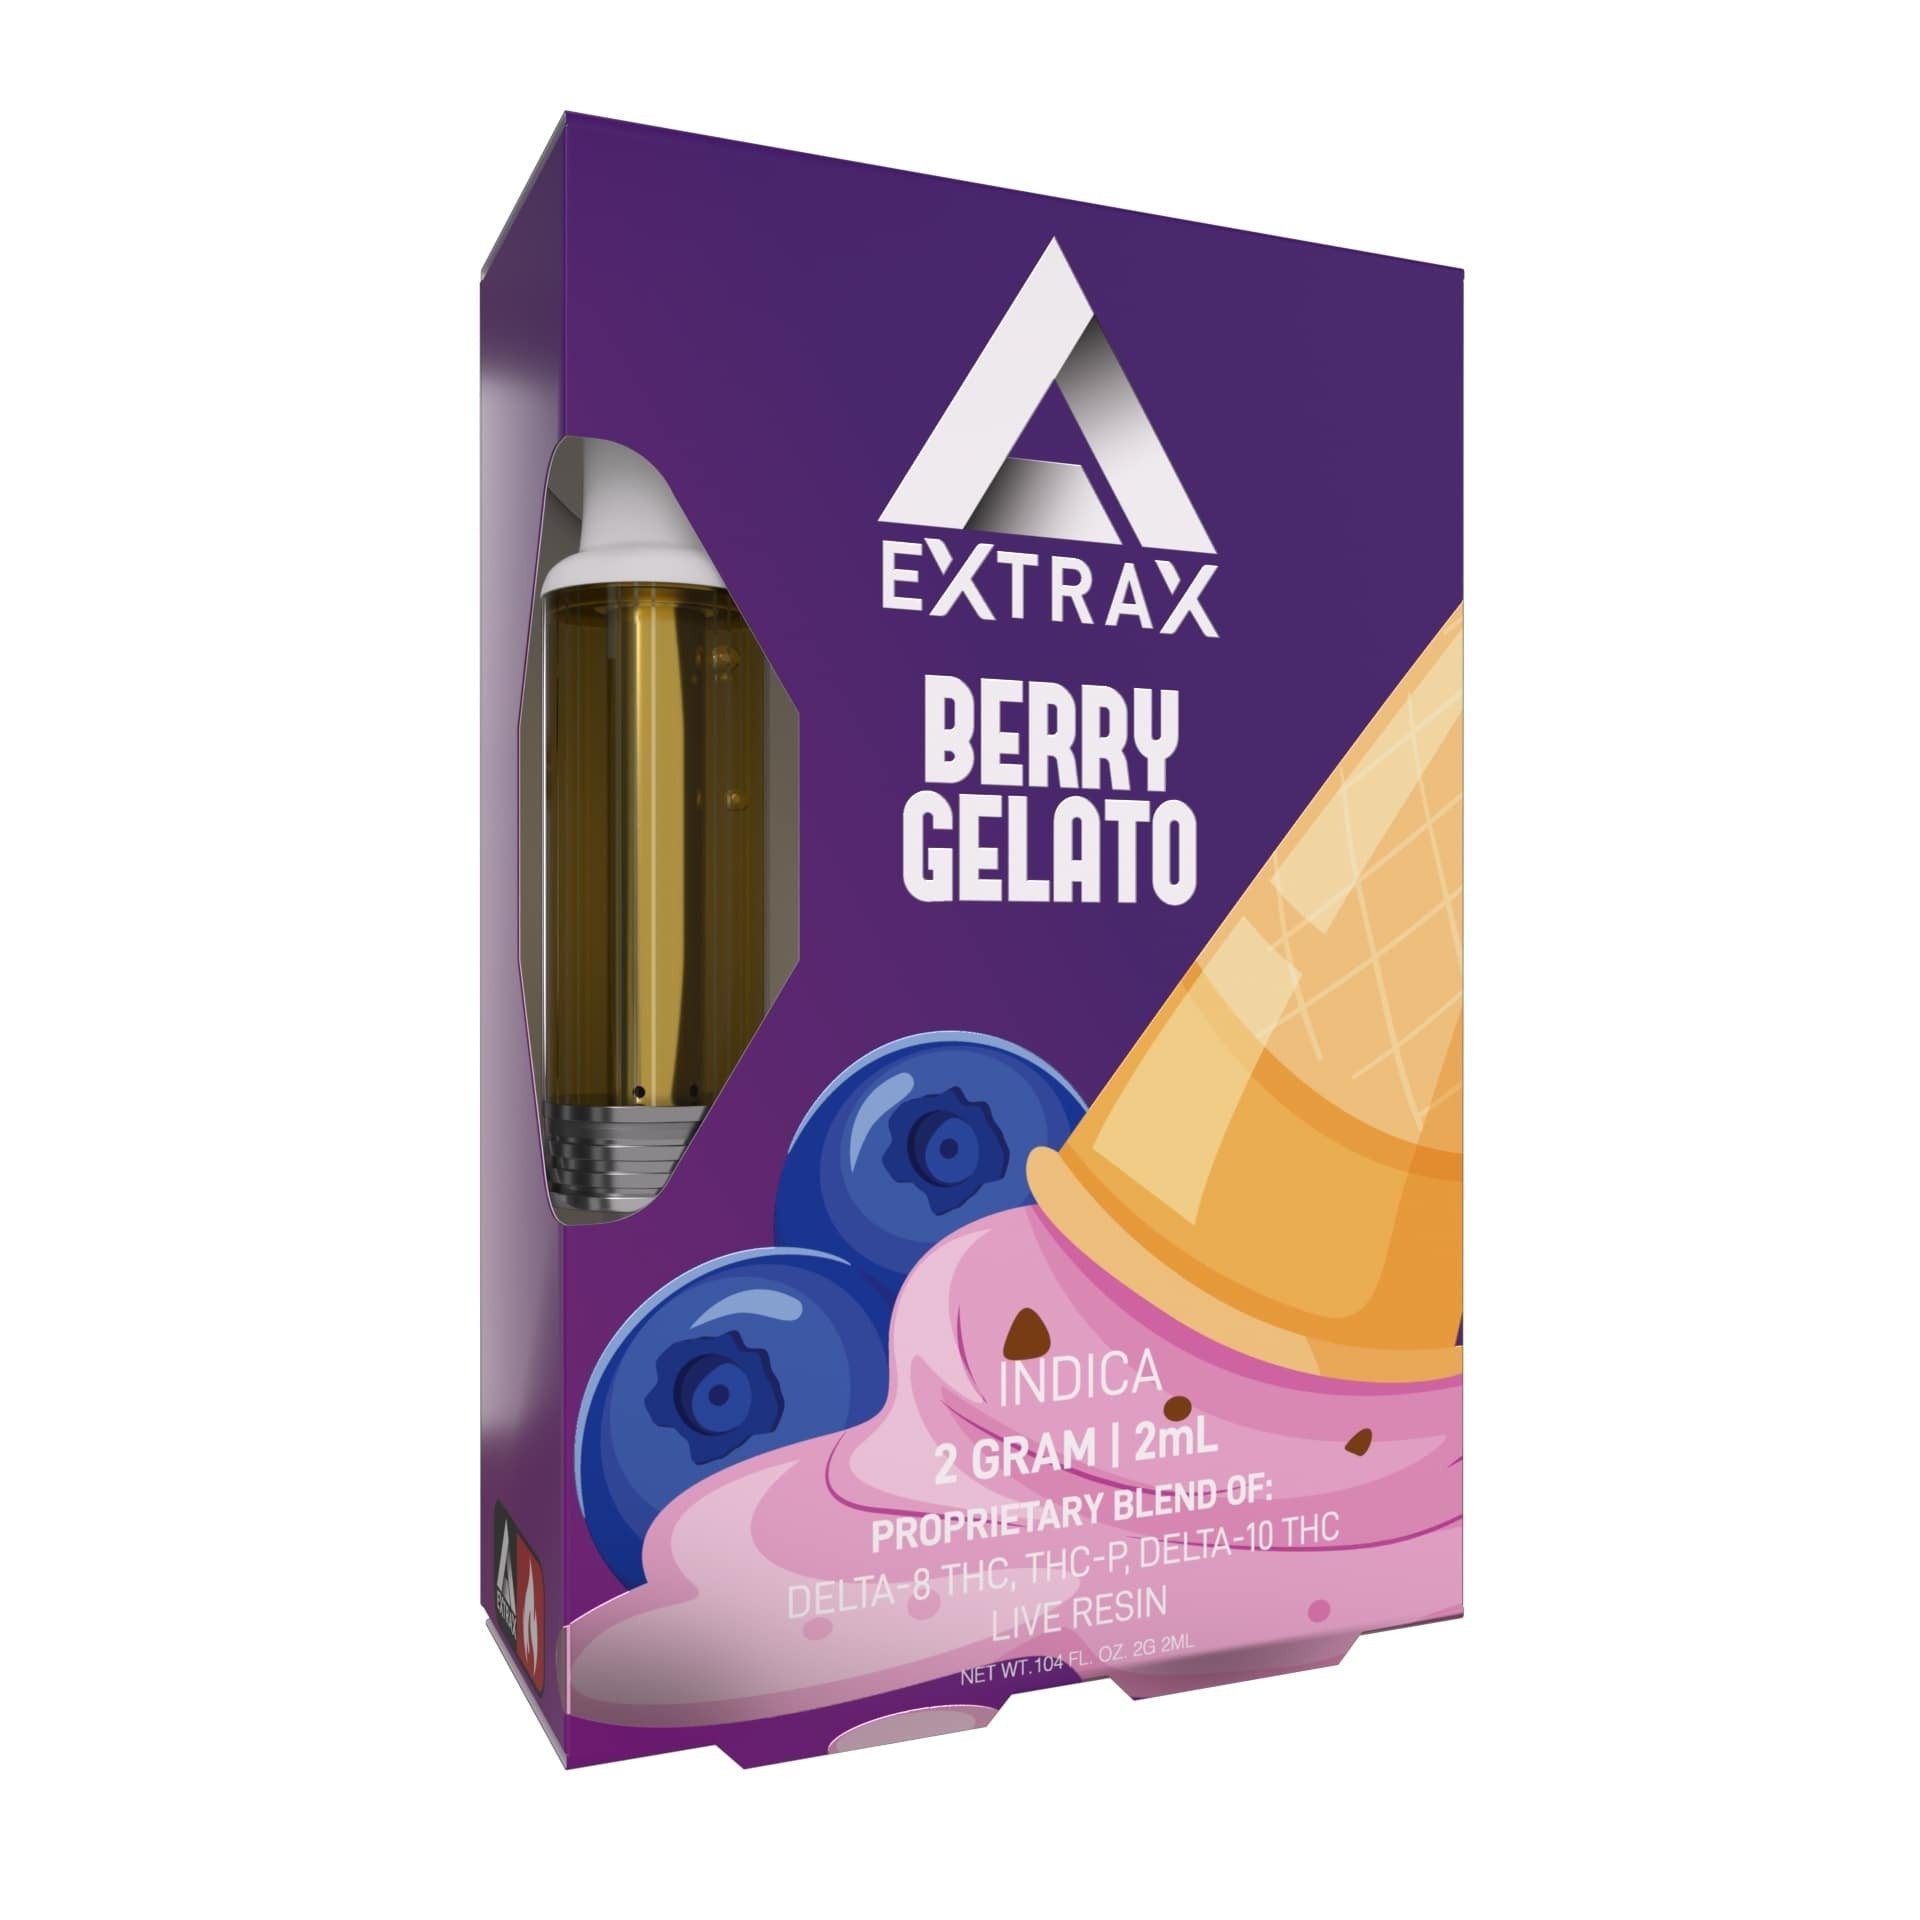 Delta Extrax Berry Gelato Disposable Live Resin Carts Best Price